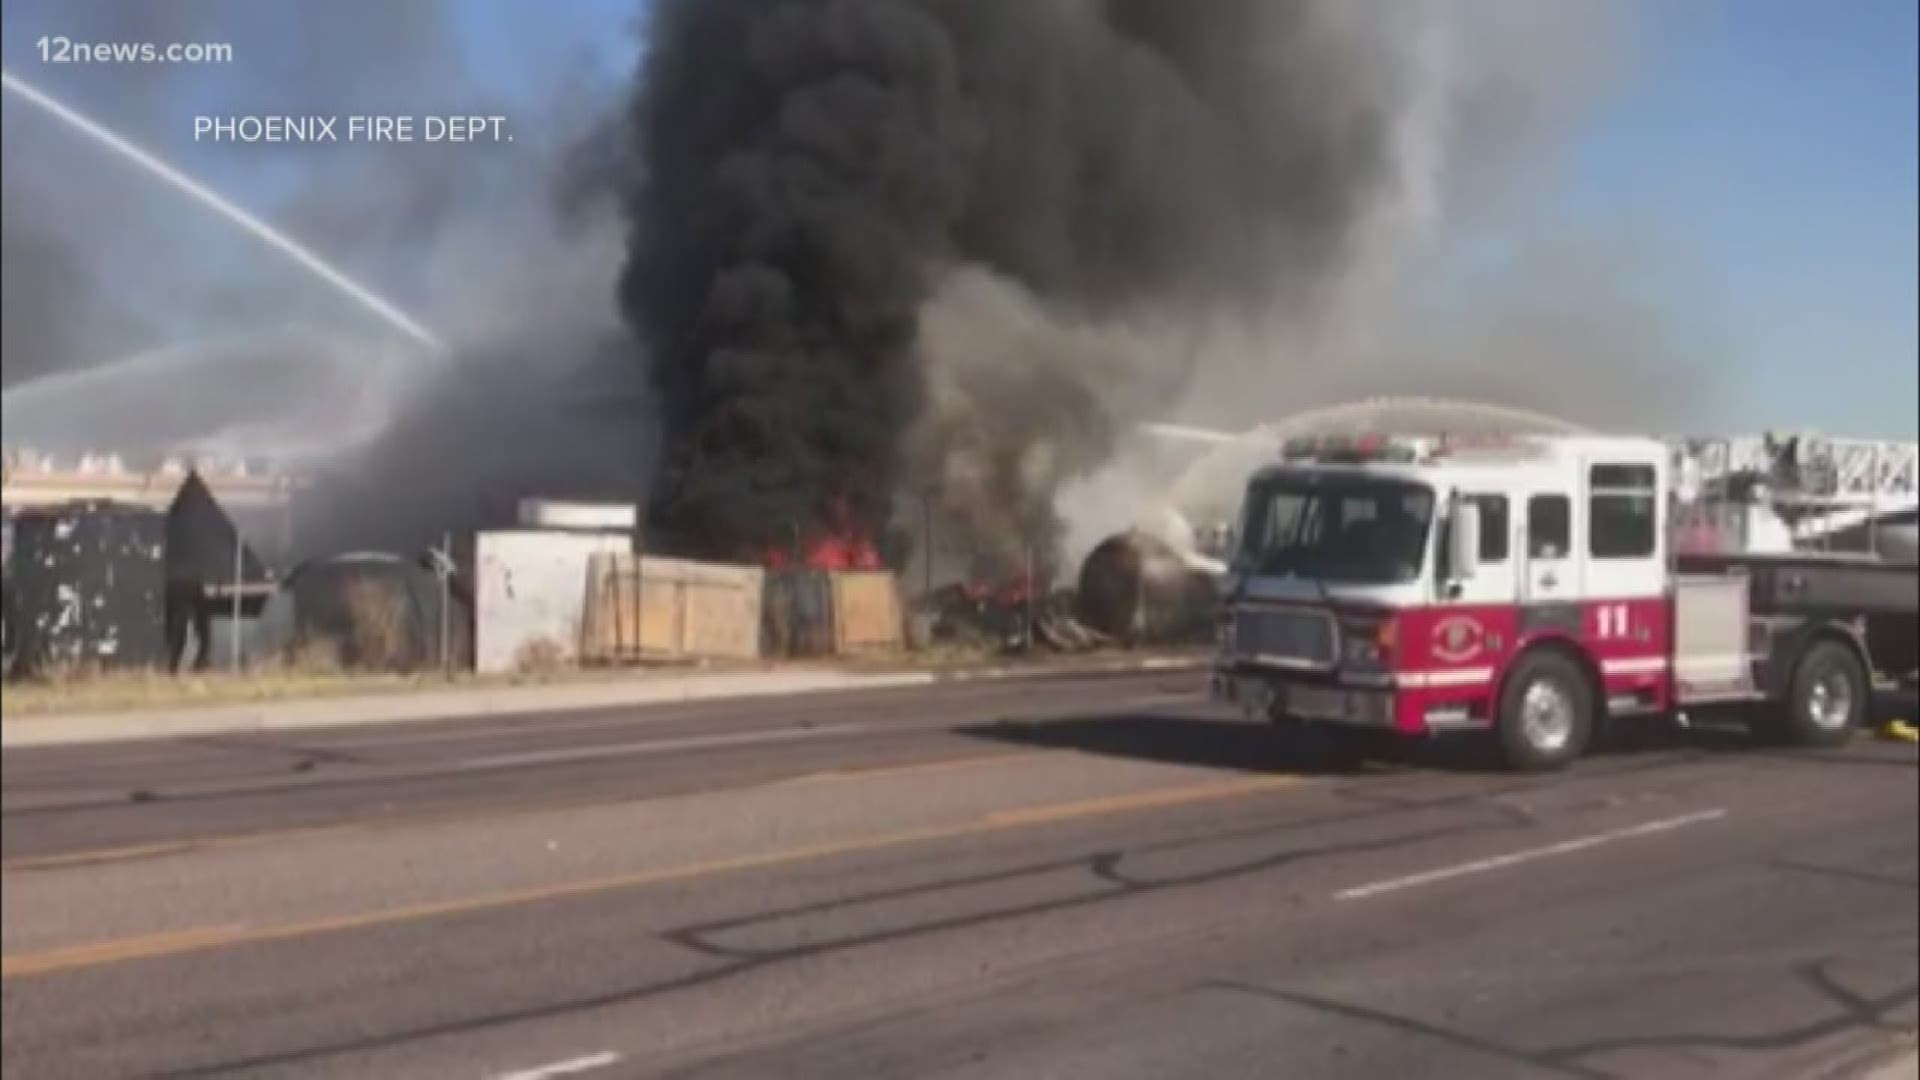 A massive fire at a scrapyard near 27th Avenue and McDowell has stopped progressing. The cause of the fire is unknown and none of the surrounding business or buildings were damaged. The area is shut down to traffic for several hours. Stay with 12 News for updates on the situation.